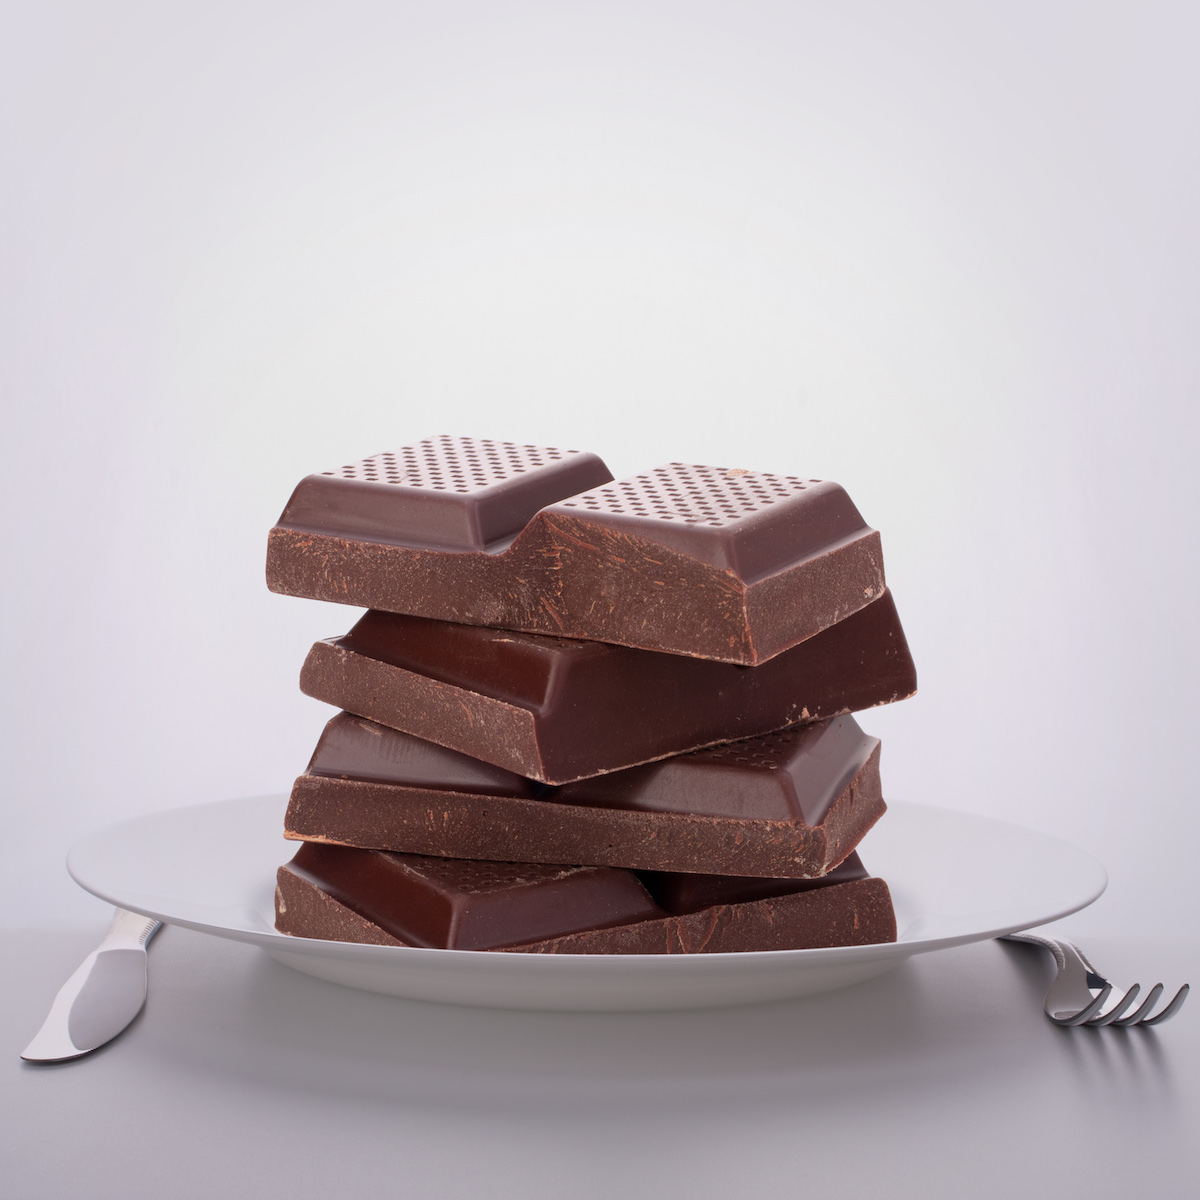 From Cocoa to Chocolate, All in One Place: Chocolateros.net